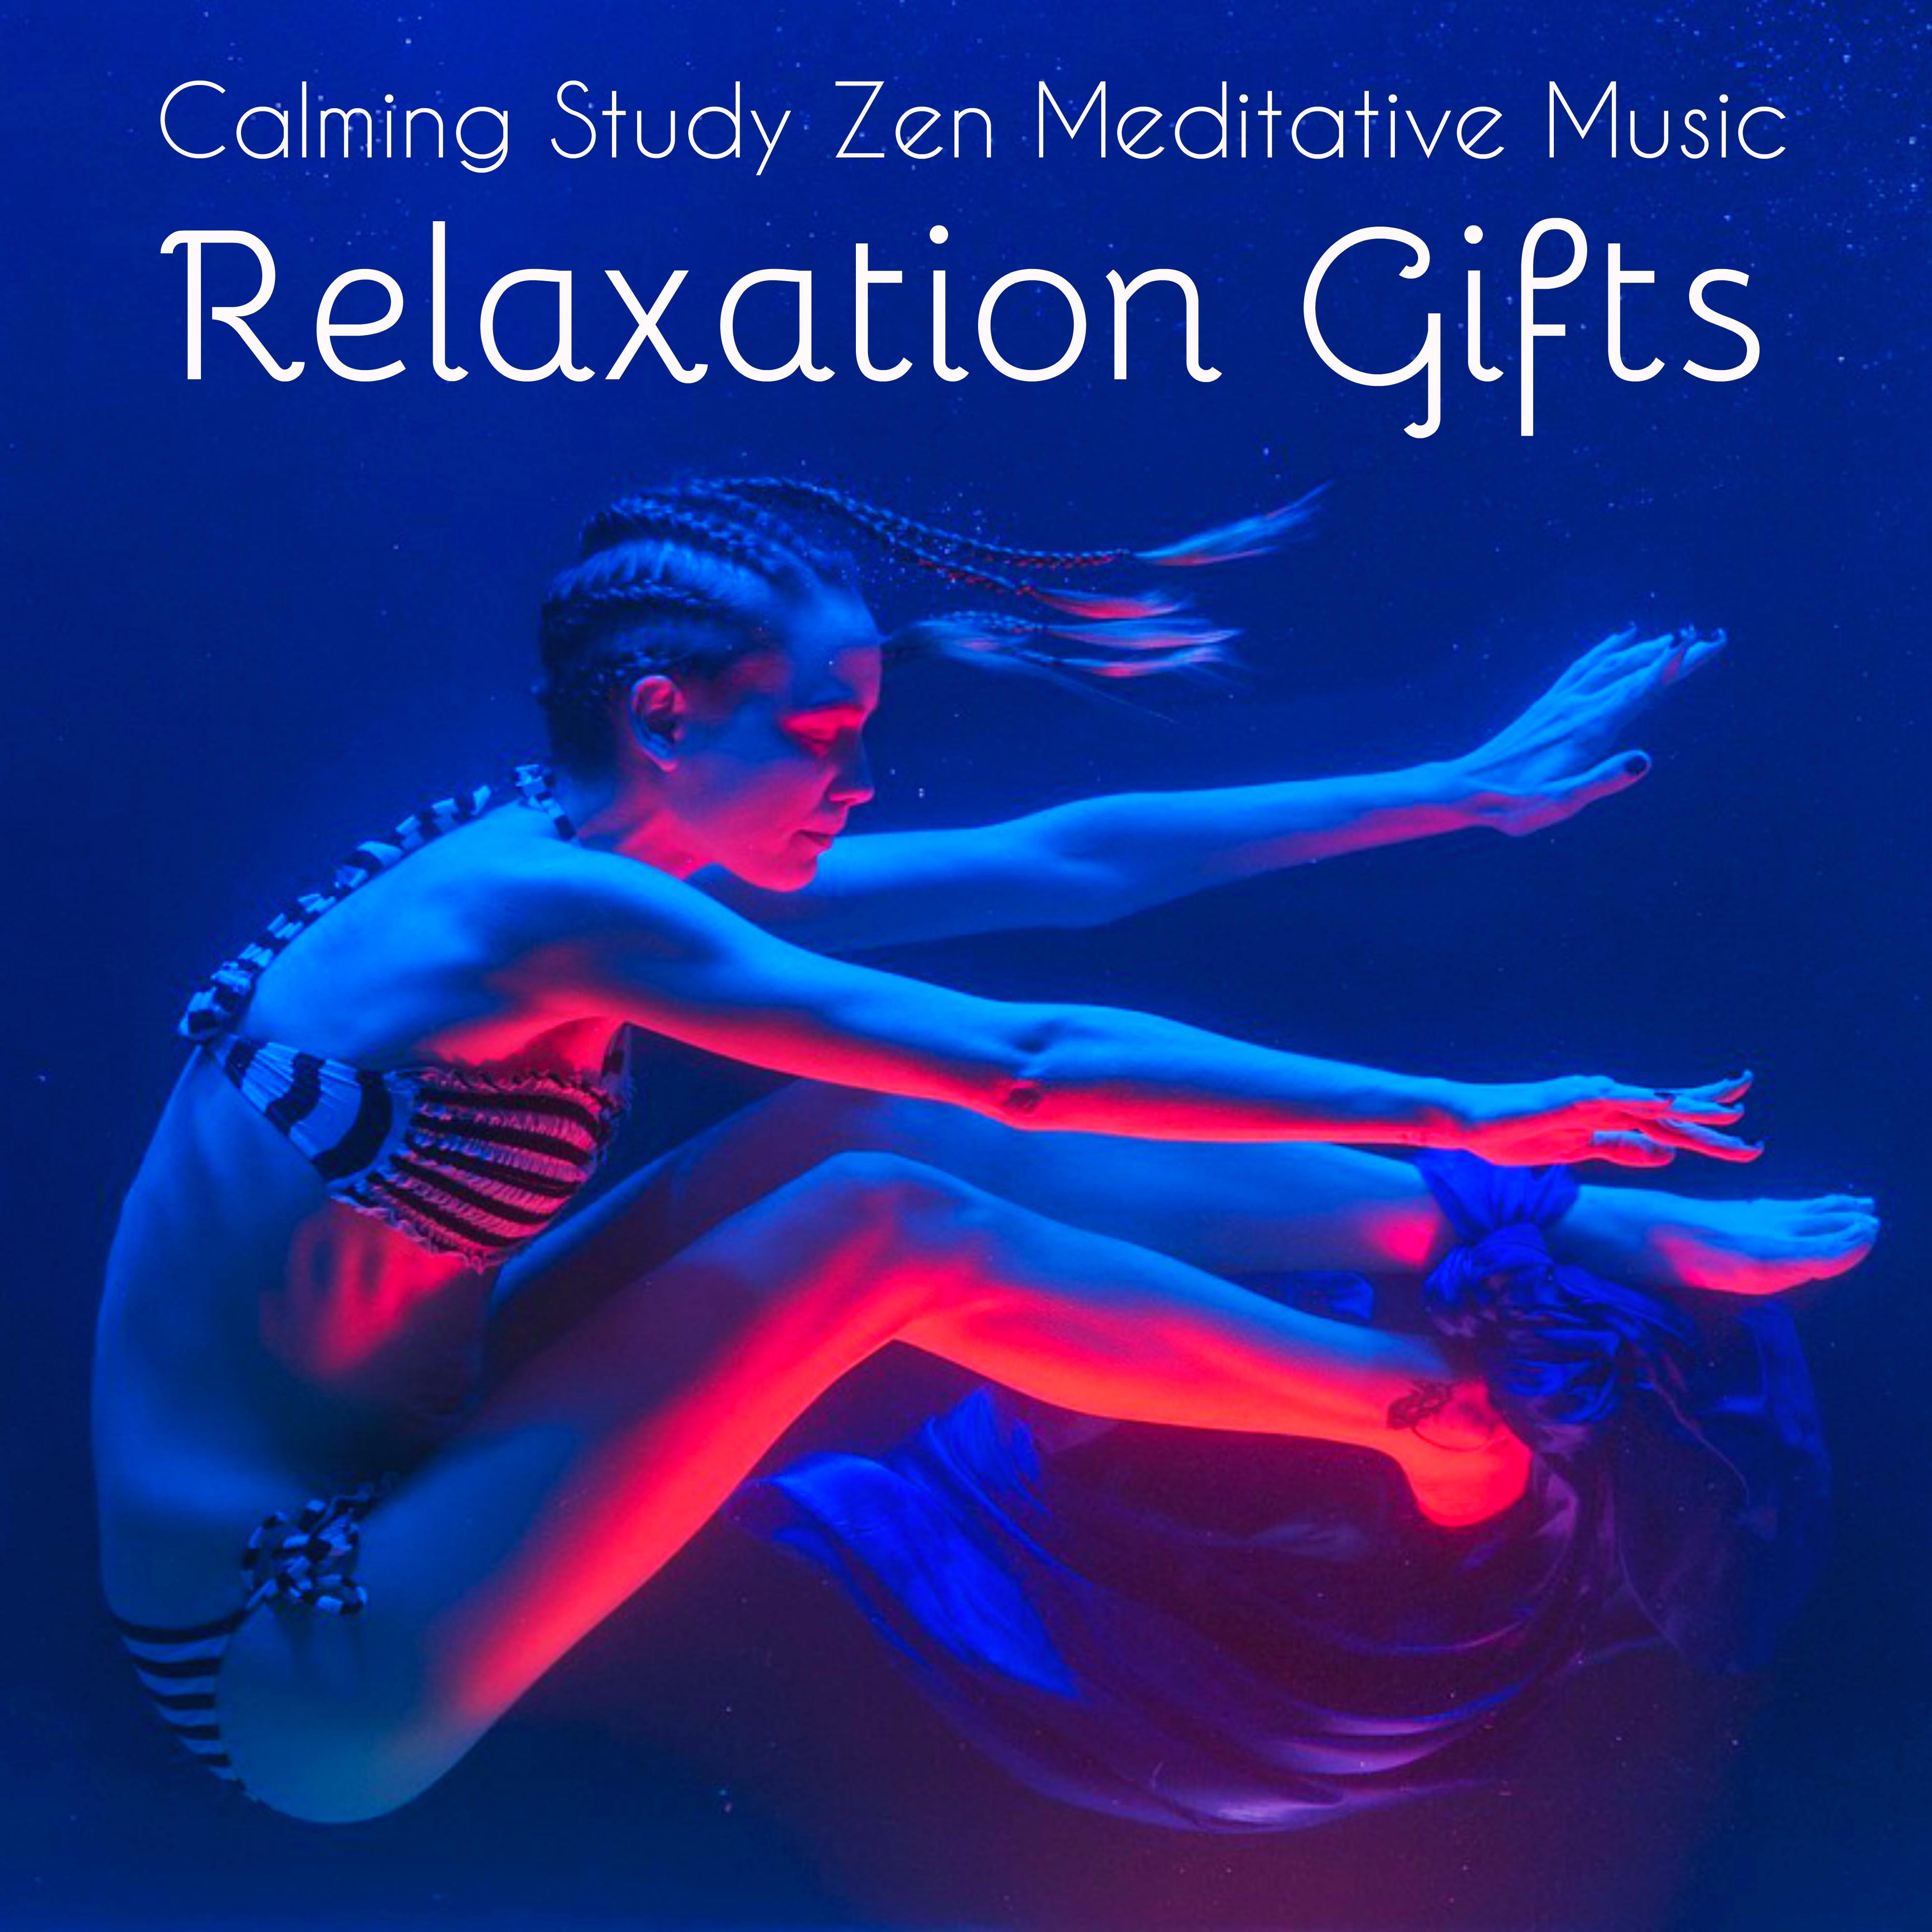 Relaxation Gifts - Calming Study Zen Meditative Music for Soft Lullaby Beautiful Mind Pure Moods with Instrumental New Age nature Sounds